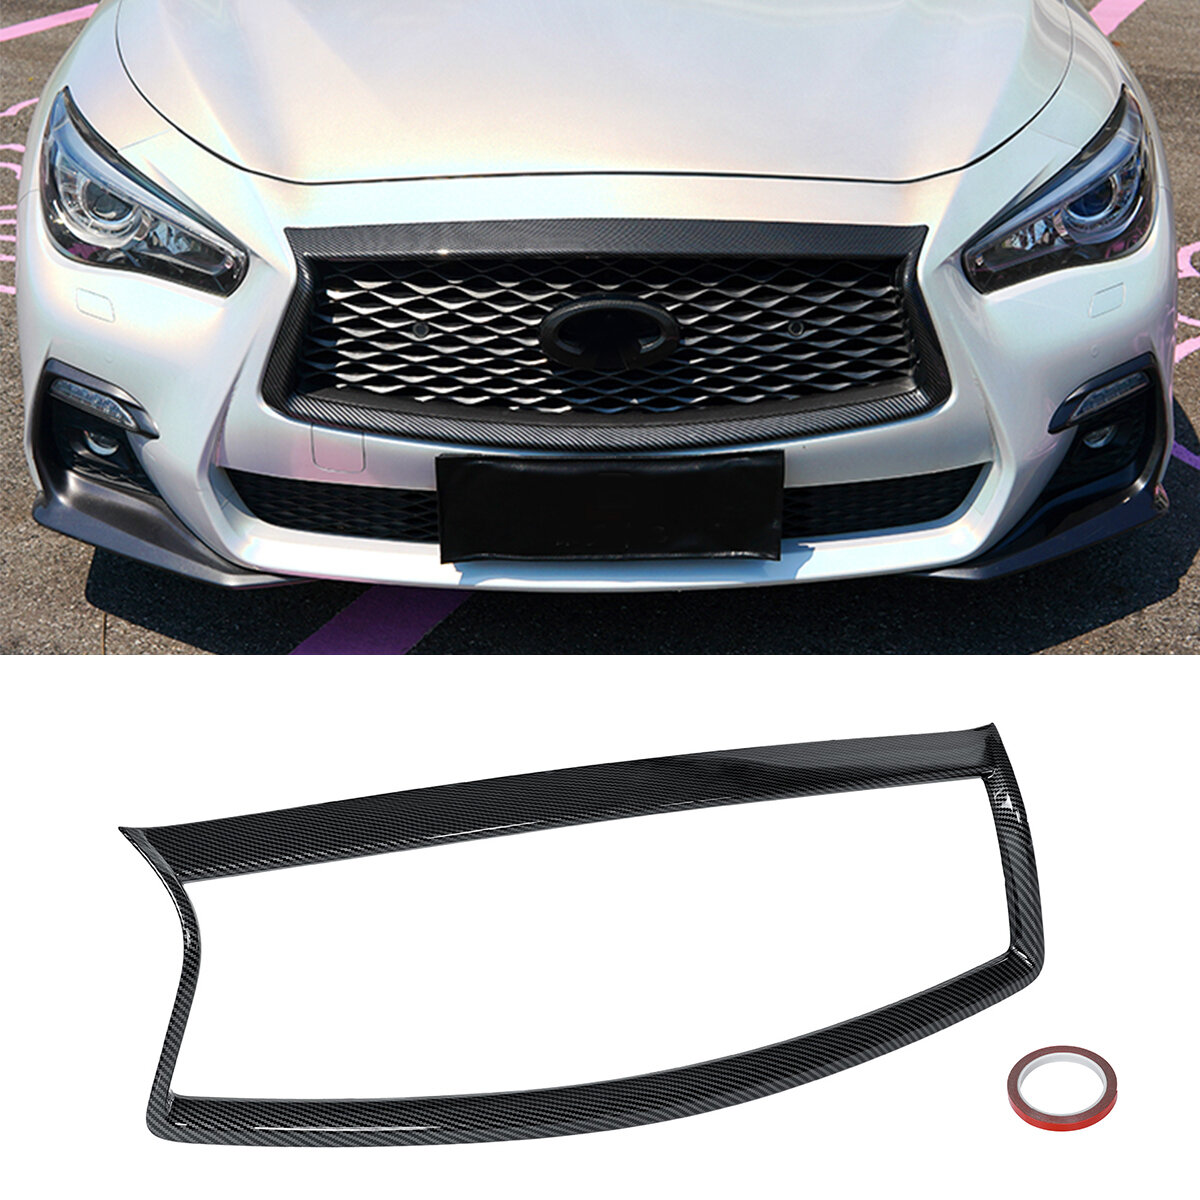 Image of Carbon Fiber Color Front Side Car Grill Outline Trim Cover Overlay For INFINITI Q50 Q50S 2018-2021